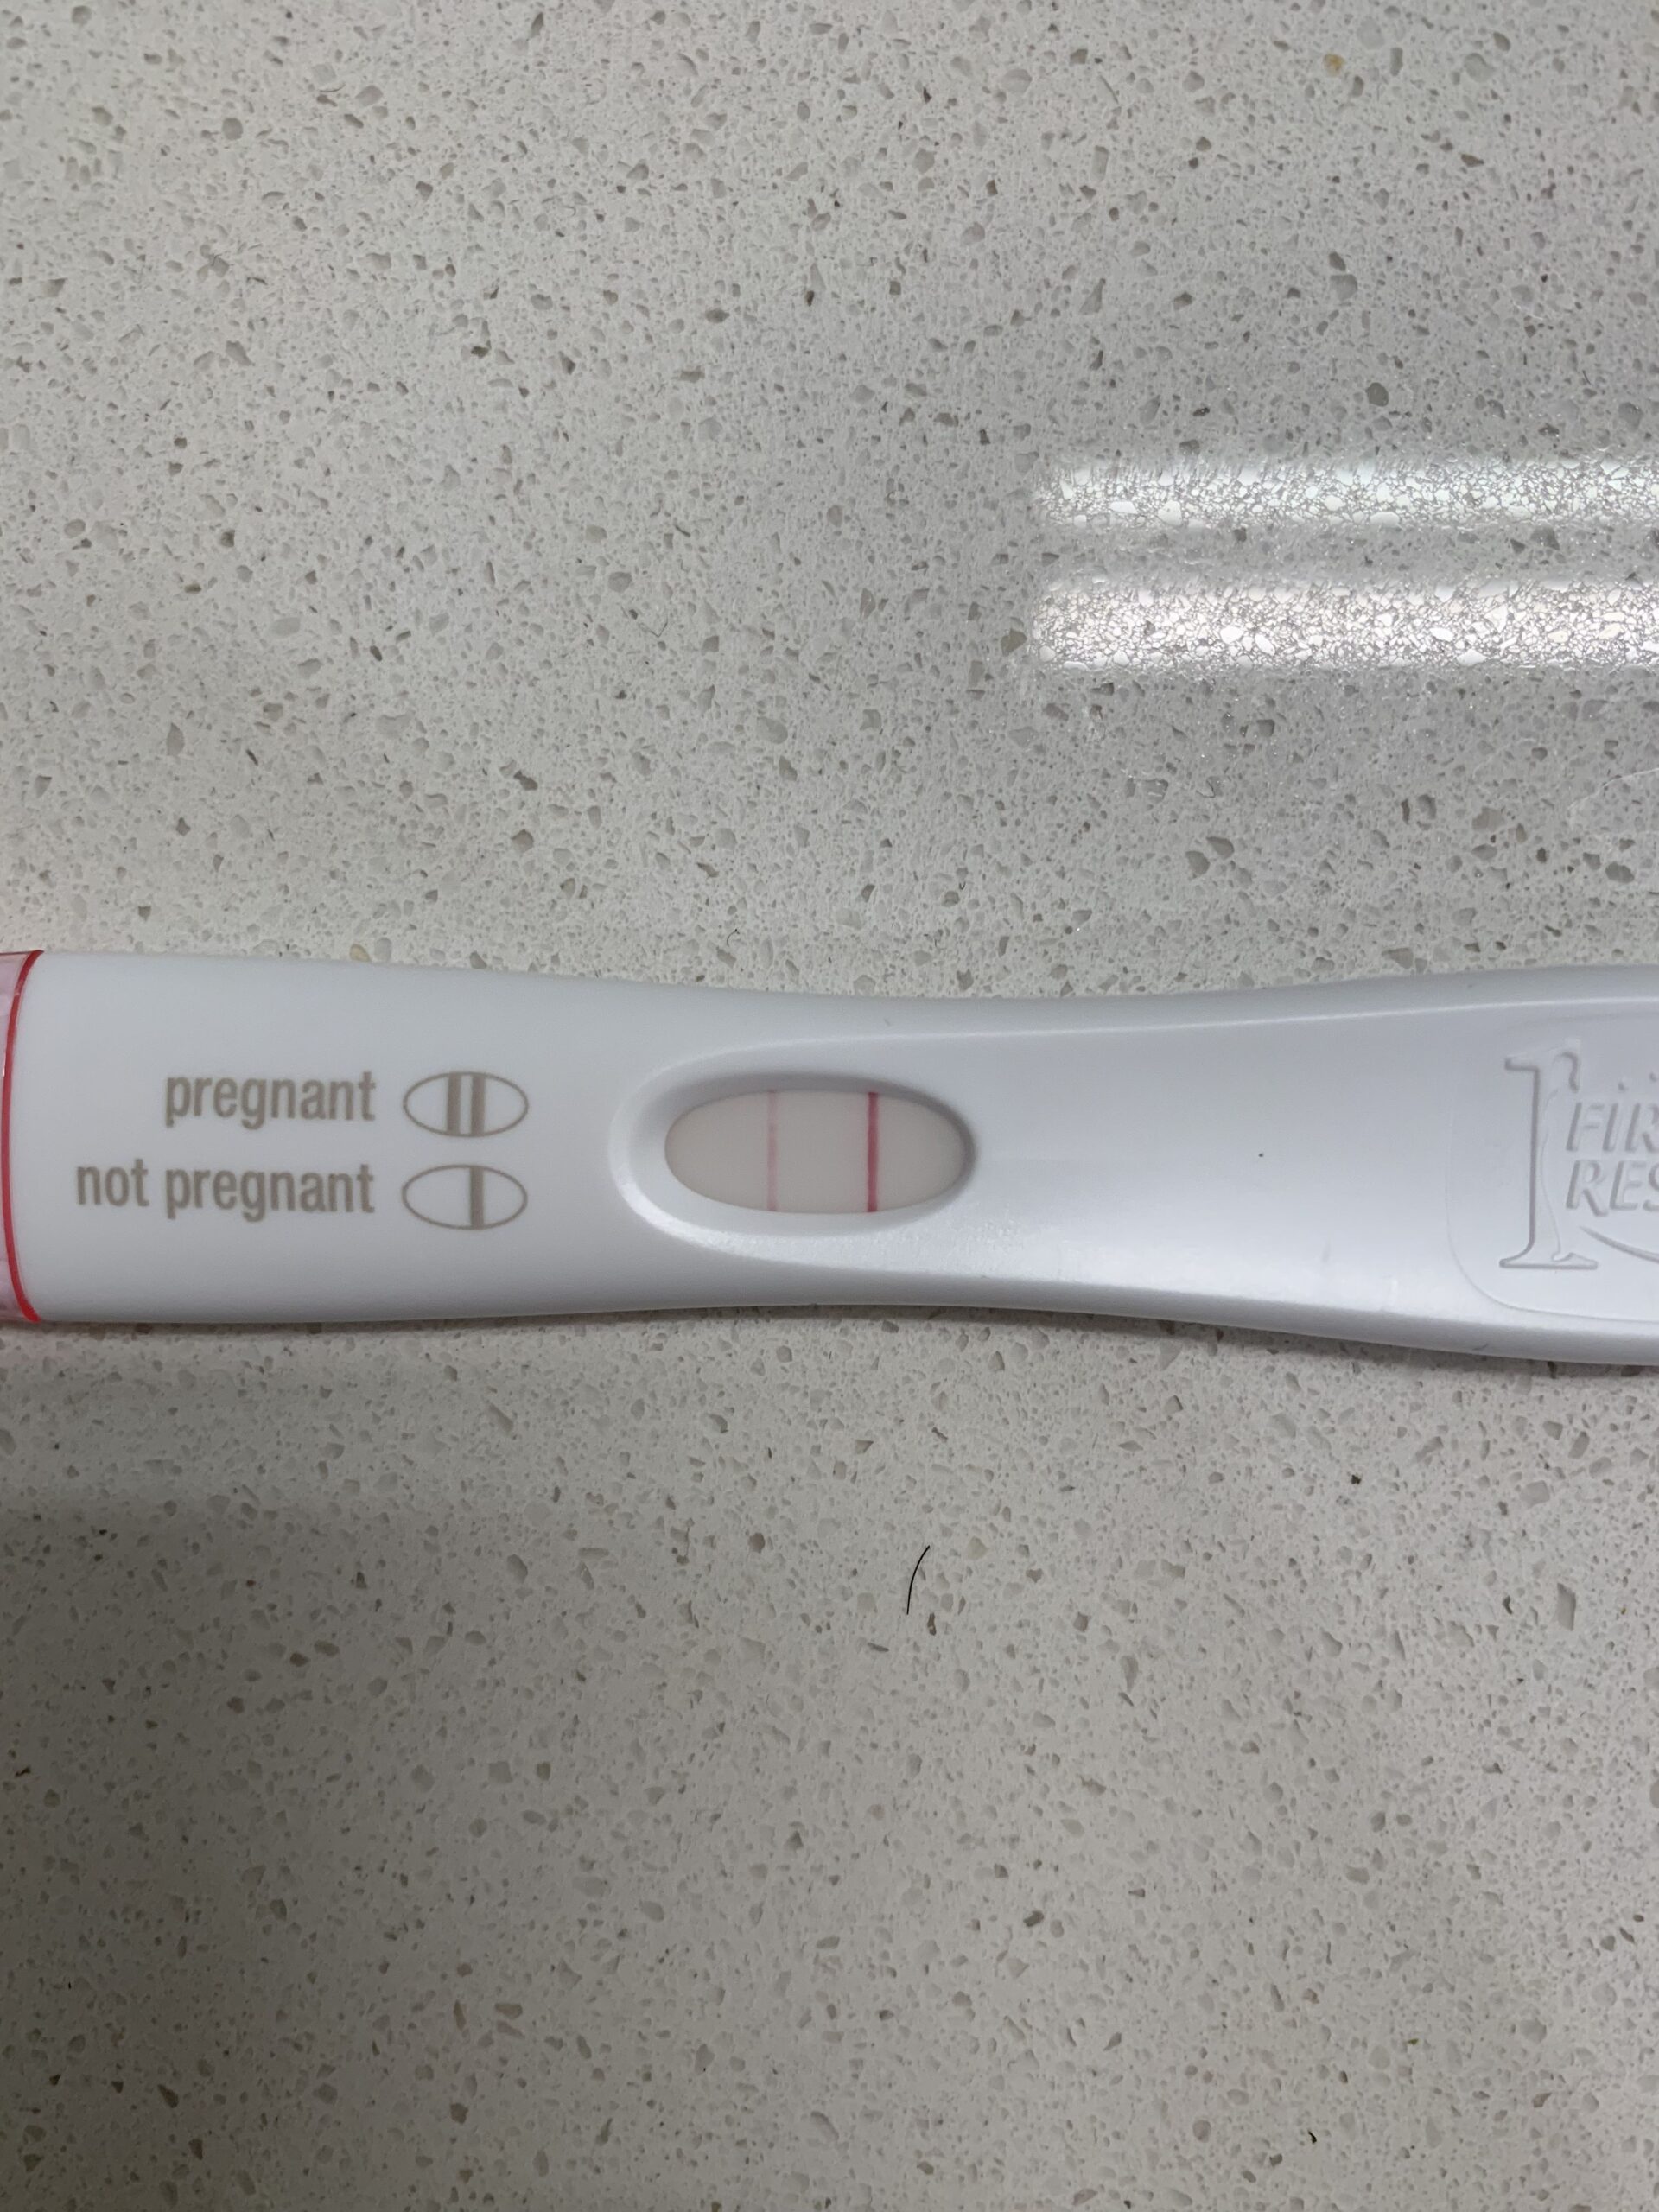 Positive Pregnancy Test during Ovulation? - Weddingbee-Boards